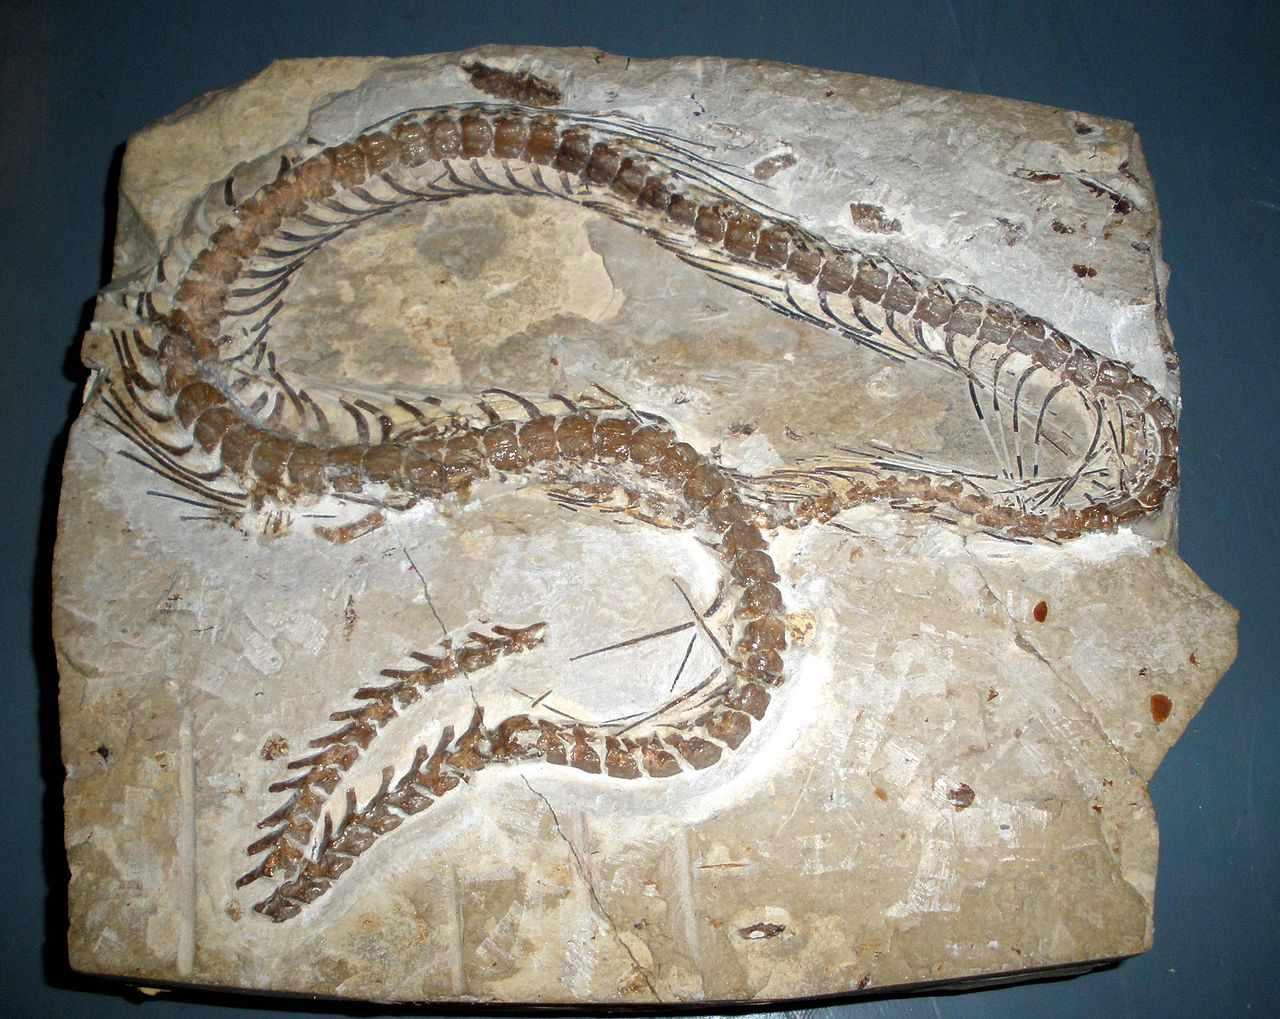 These enormous snake fossils date to a time period between 58 and 60 million years ago. - BAP NEWS